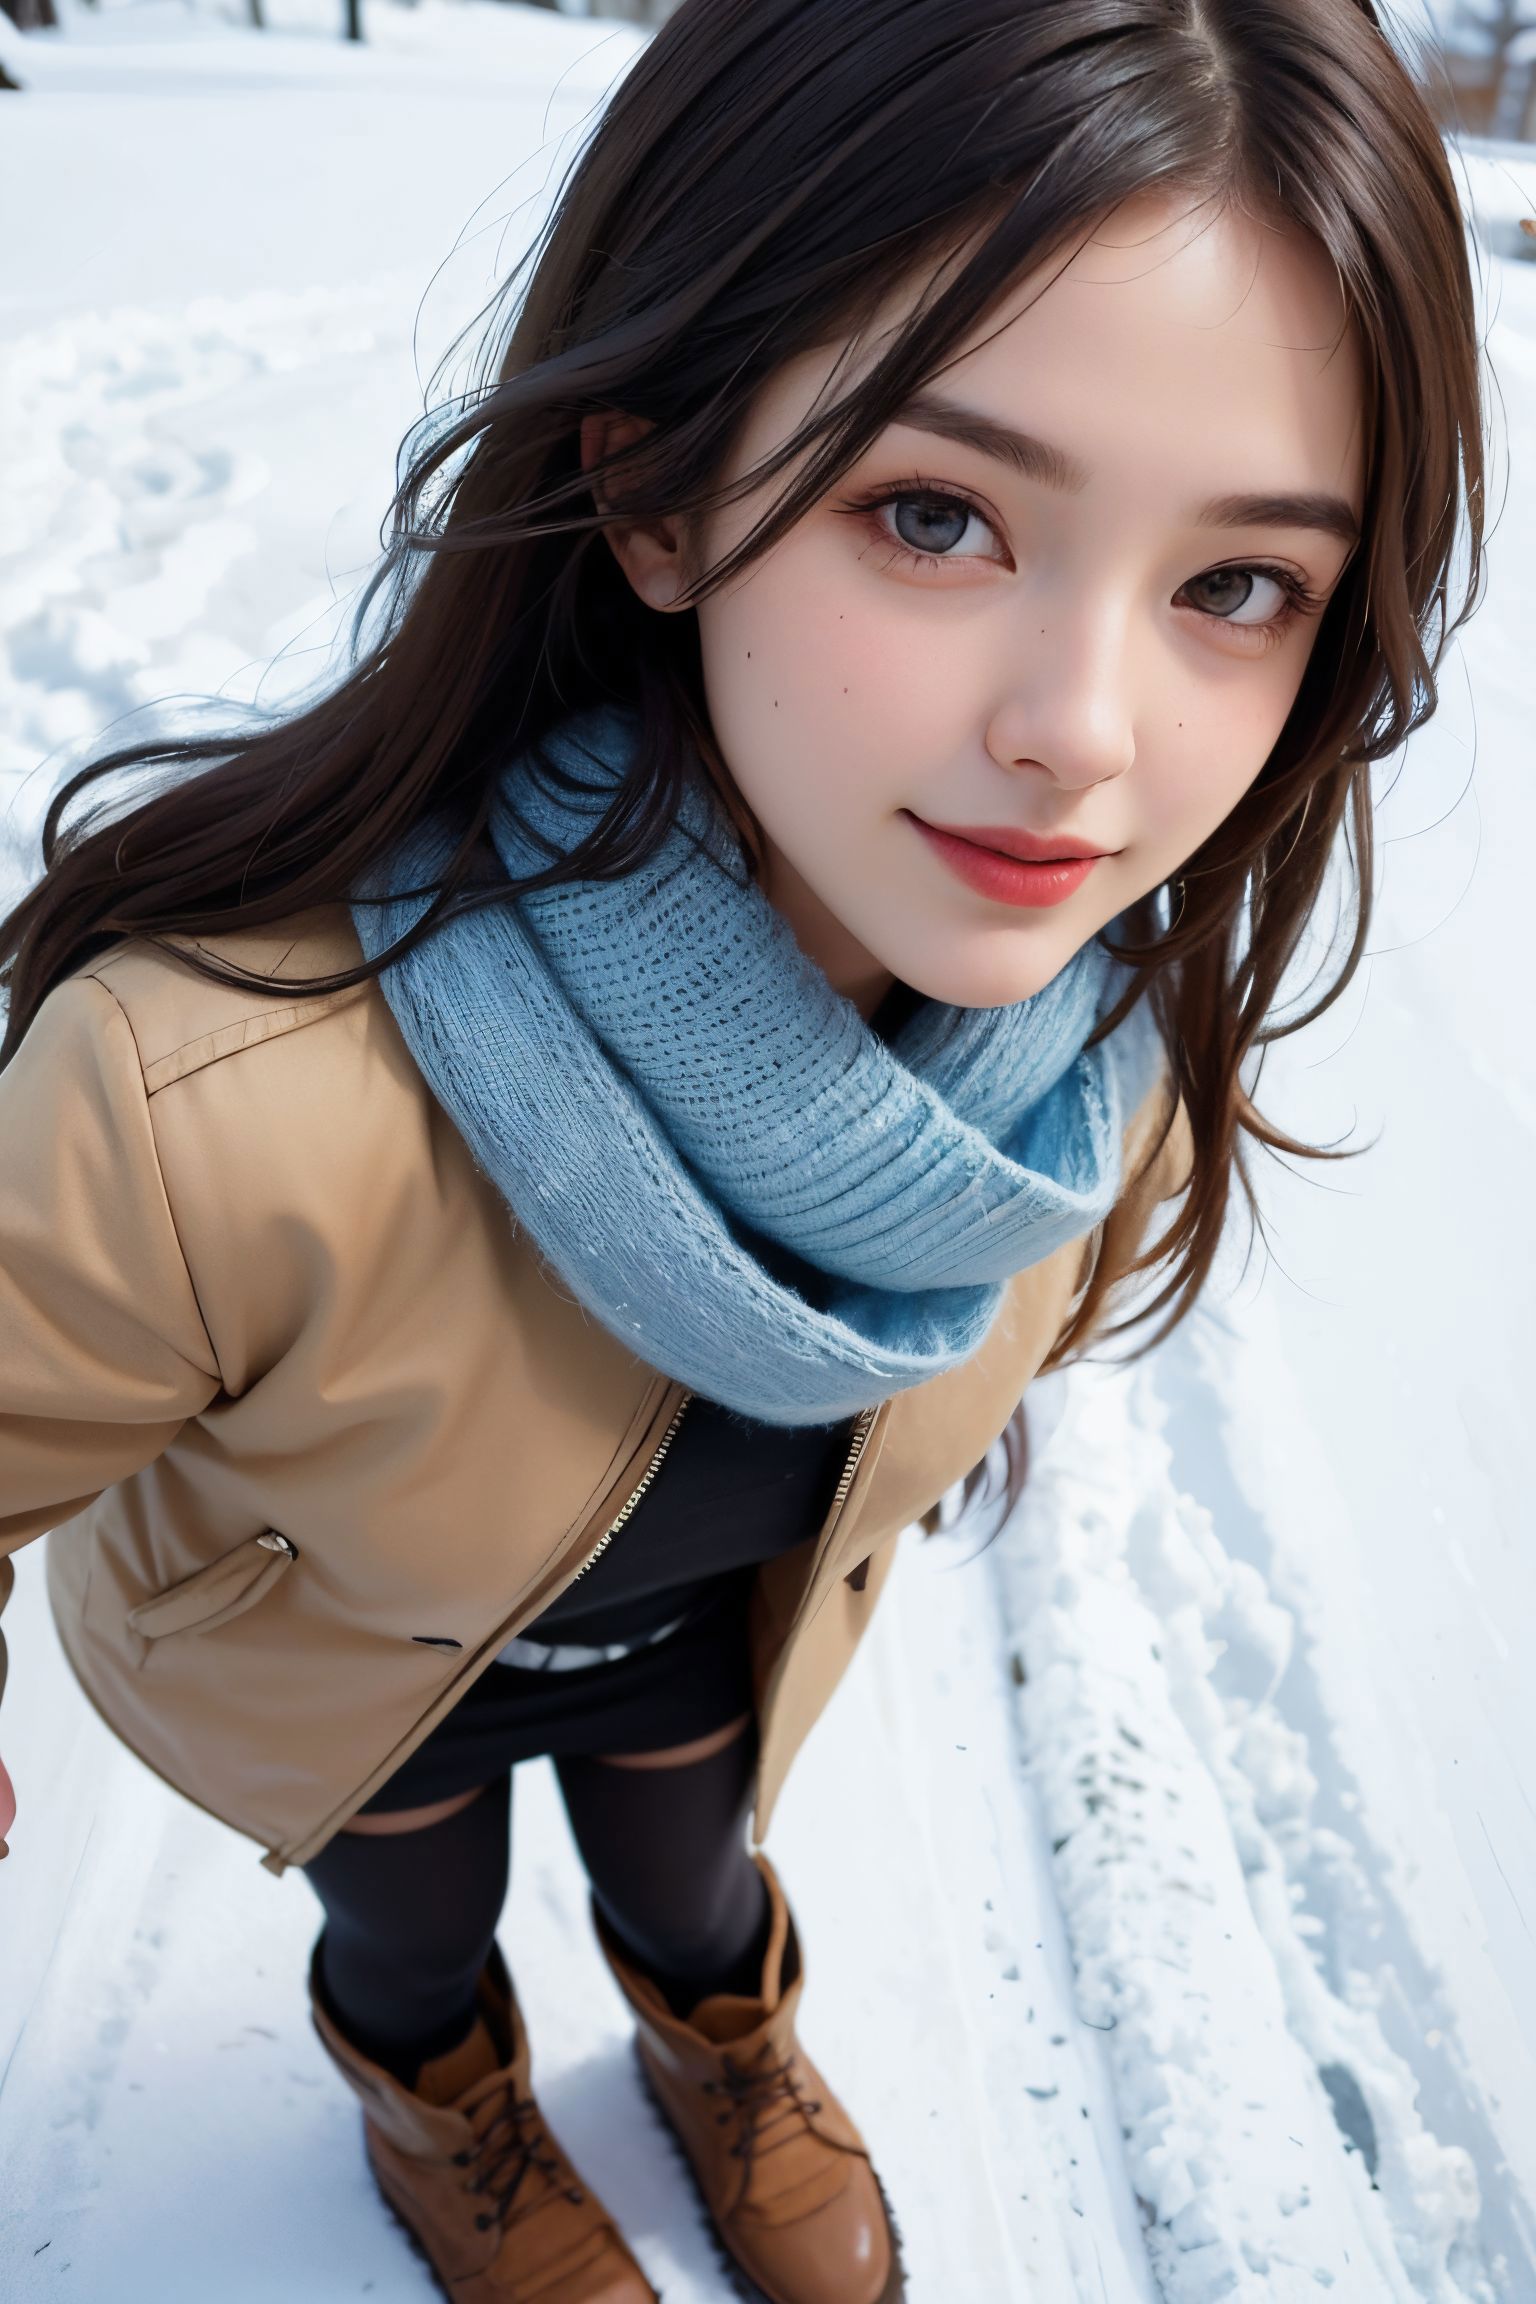 A woman in a blue scarf and black top poses for a picture in the snow.